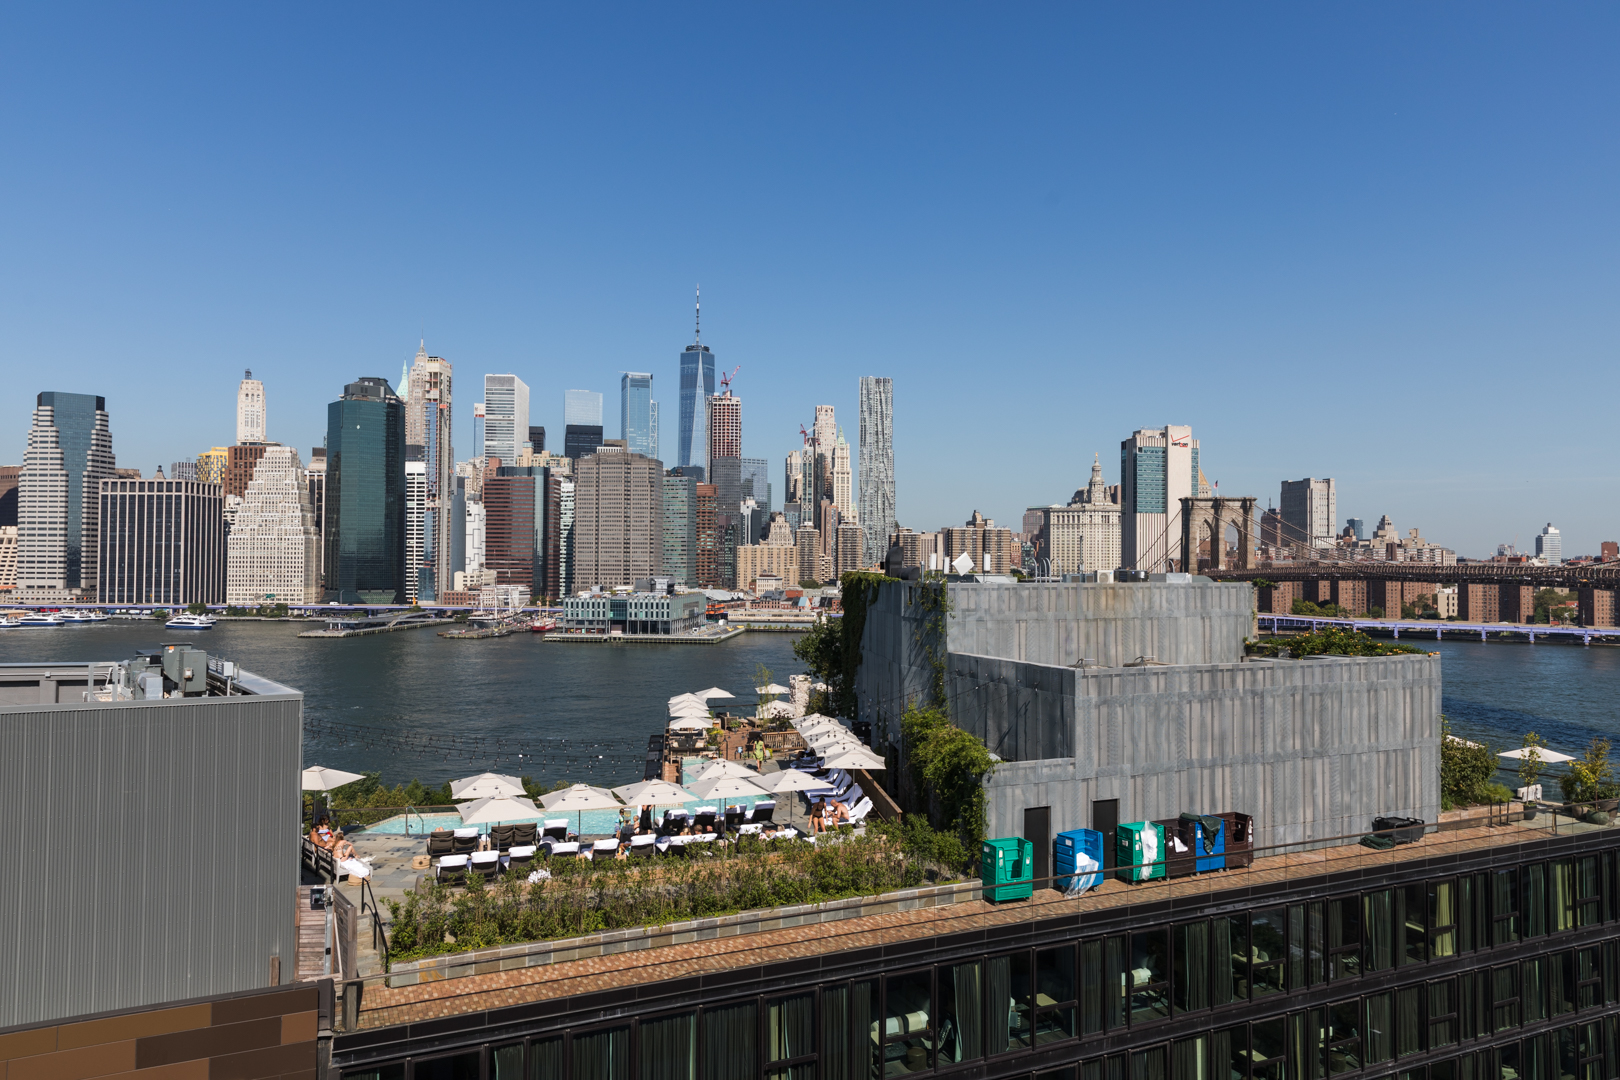 The terrace on 30 Columbia Heights looks over 1 Hotel Brooklyn Bridge’s rooftop pool with lower Manhattan in the background. Eagle photo by Paul Frangipane